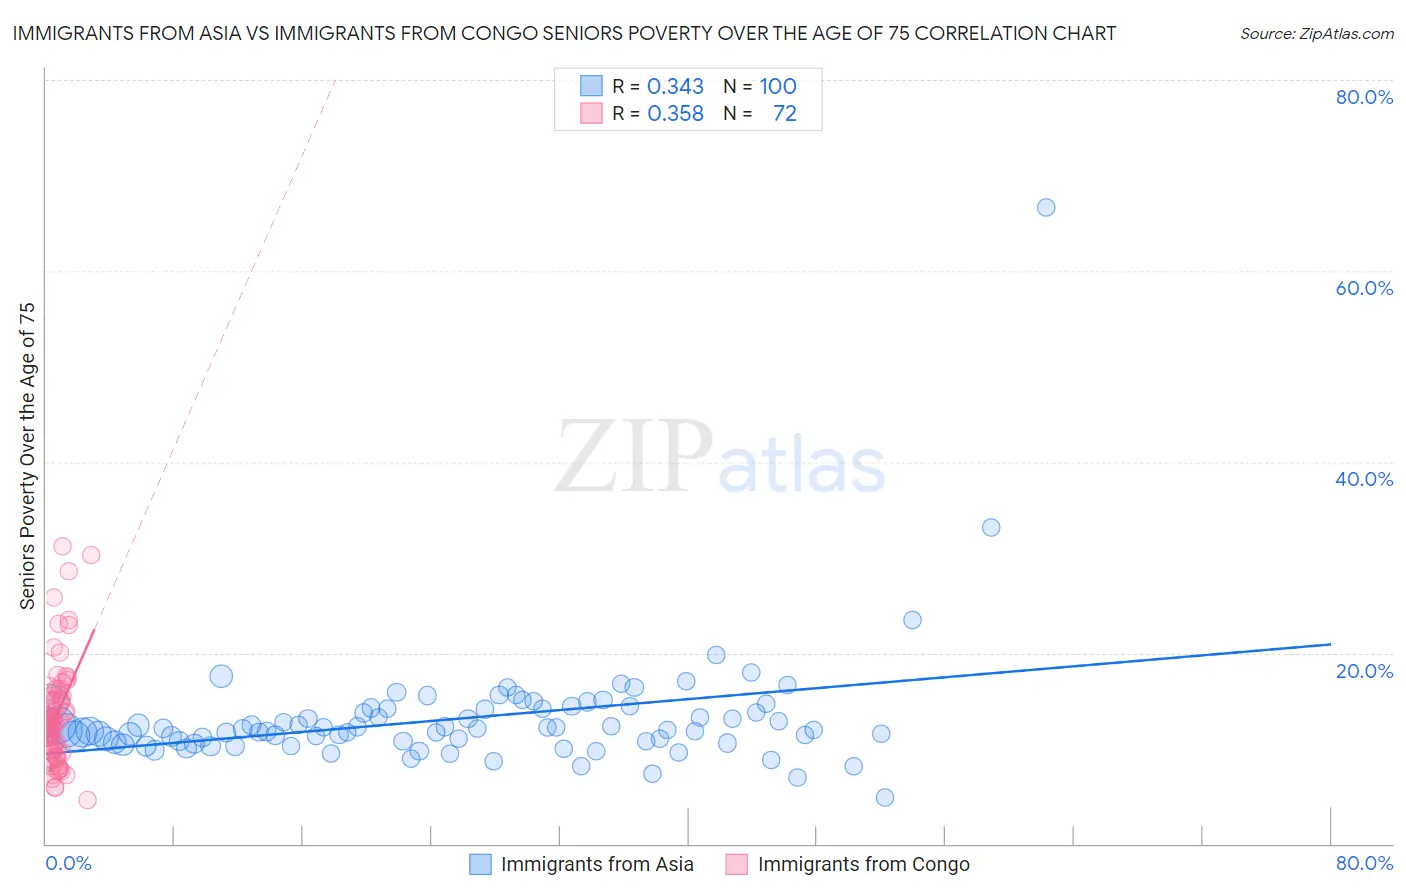 Immigrants from Asia vs Immigrants from Congo Seniors Poverty Over the Age of 75